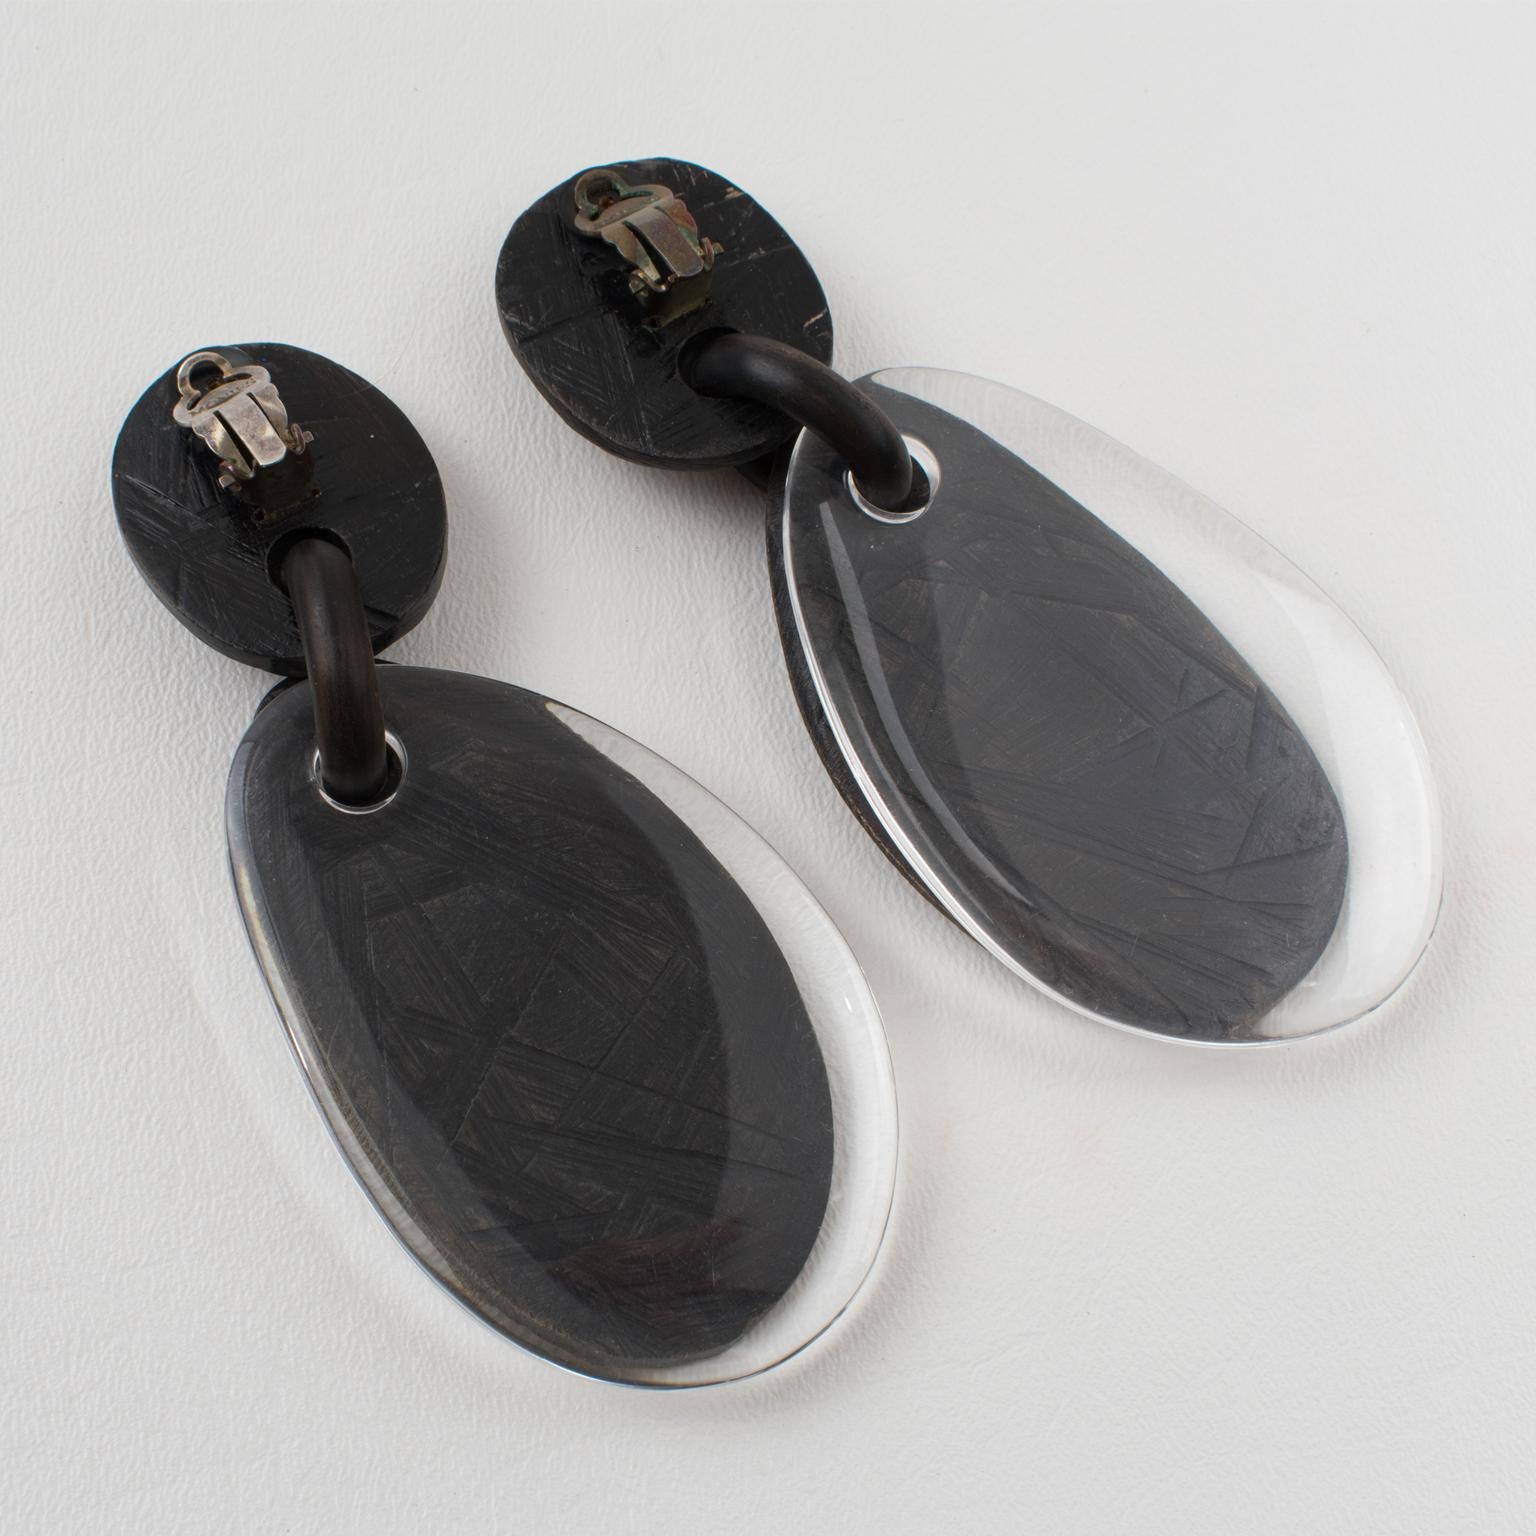 Monies Massive Dangle Clip Earrings Acrylic and Ebony Wood In Excellent Condition For Sale In Atlanta, GA